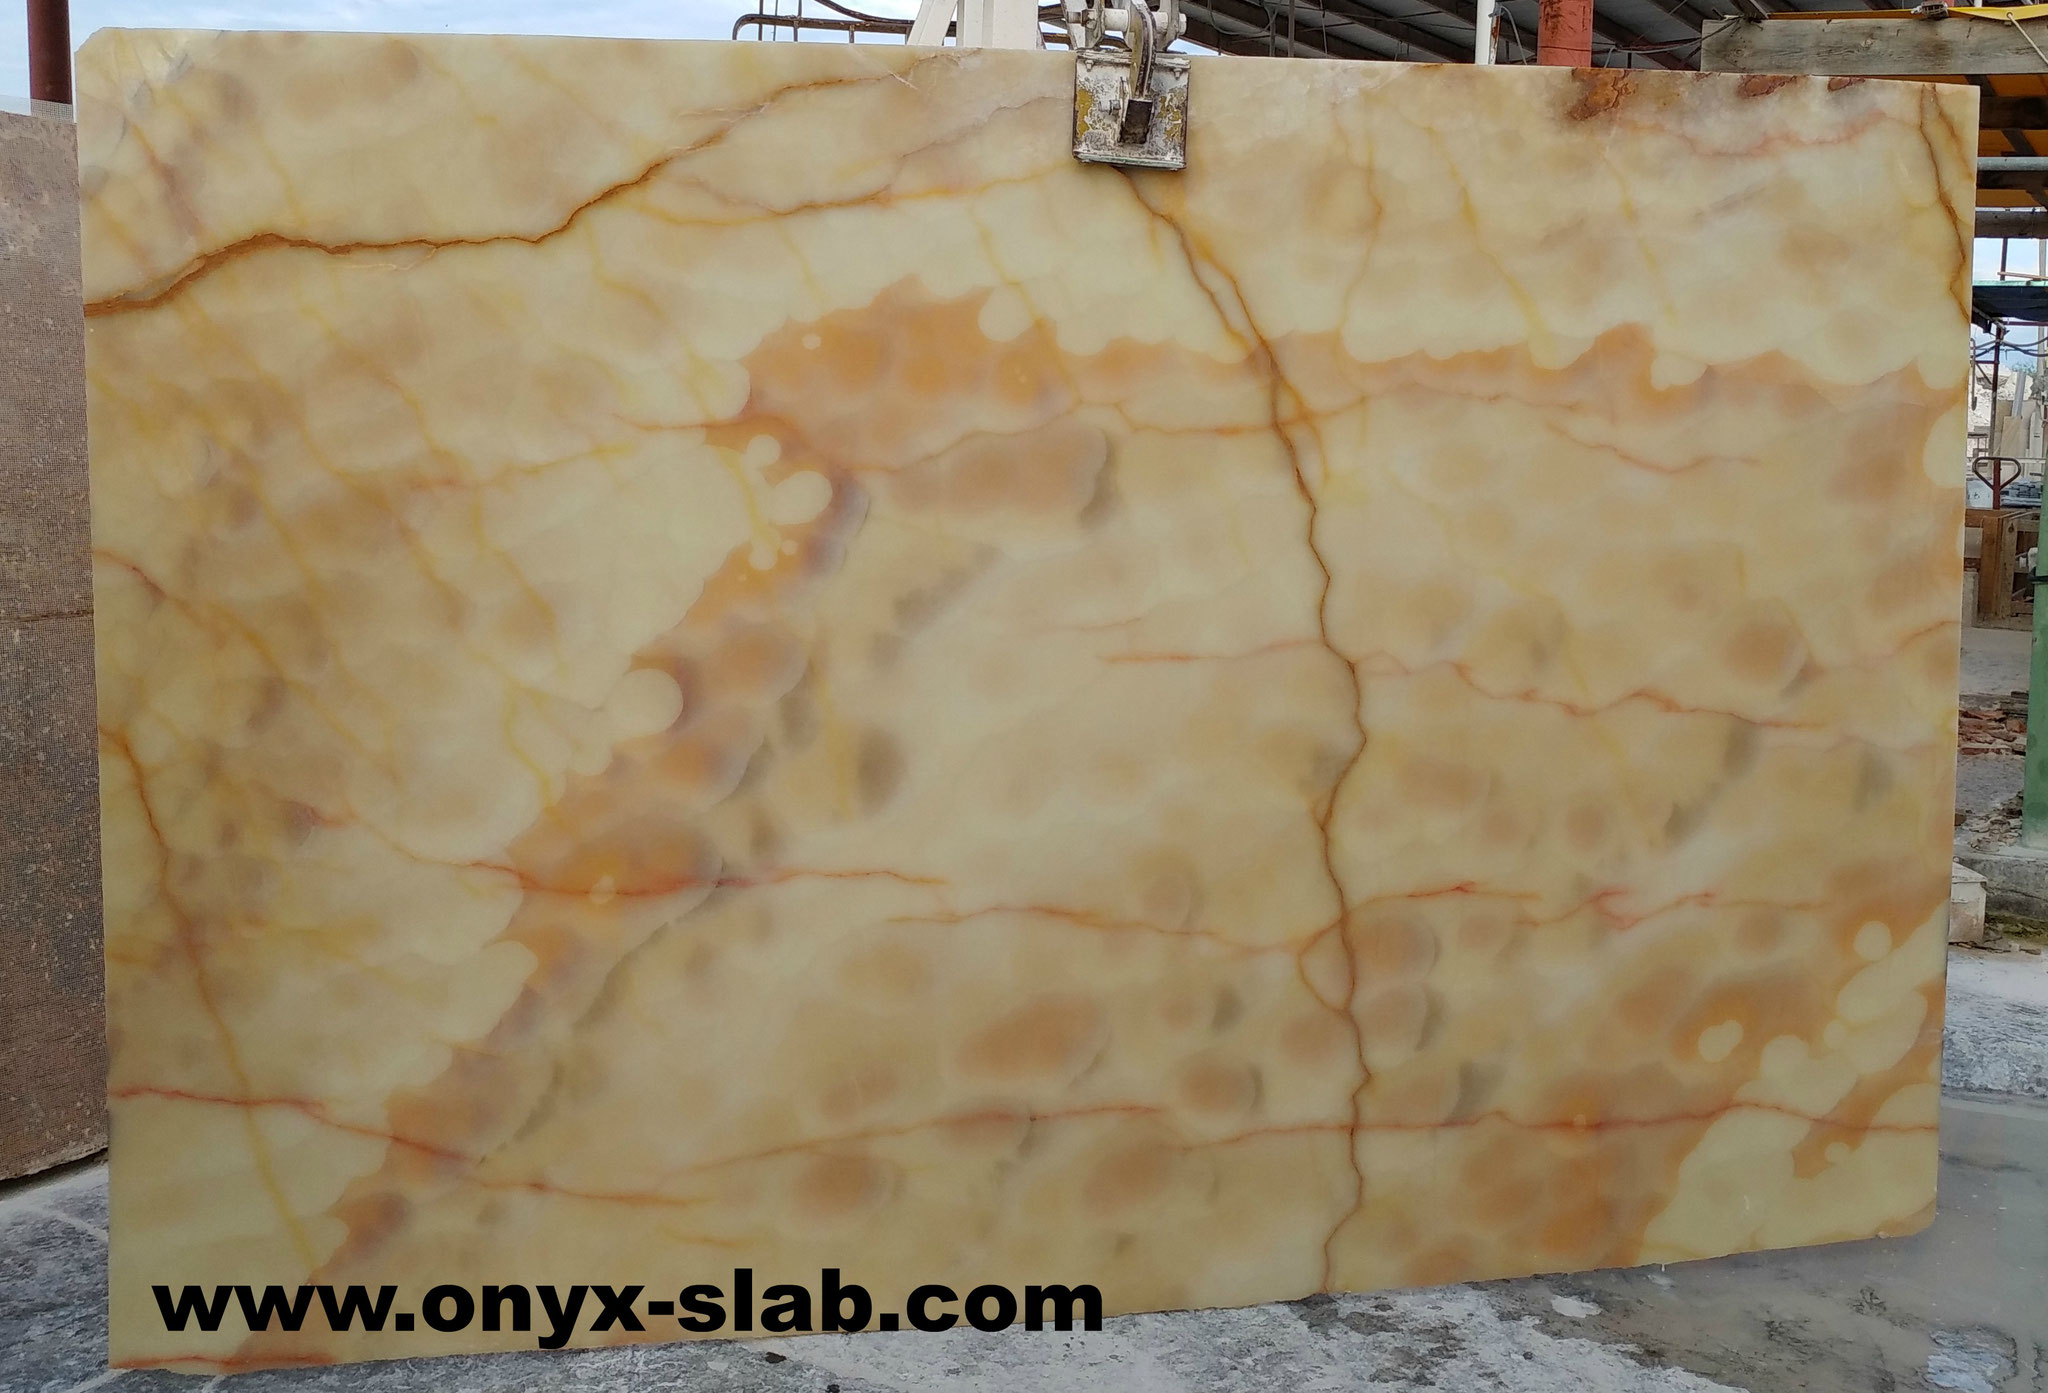 red onyx slabs, red onyx slab, onyx slab, onyx slab price, onyx slab for sale, cost of onyx coutertops, onyx coutertops, onyxslabs bookmatch, onyx stone, MSI onyx, onyx slabs suppliers, onyx slabs manufactures, backlight onyx slabs